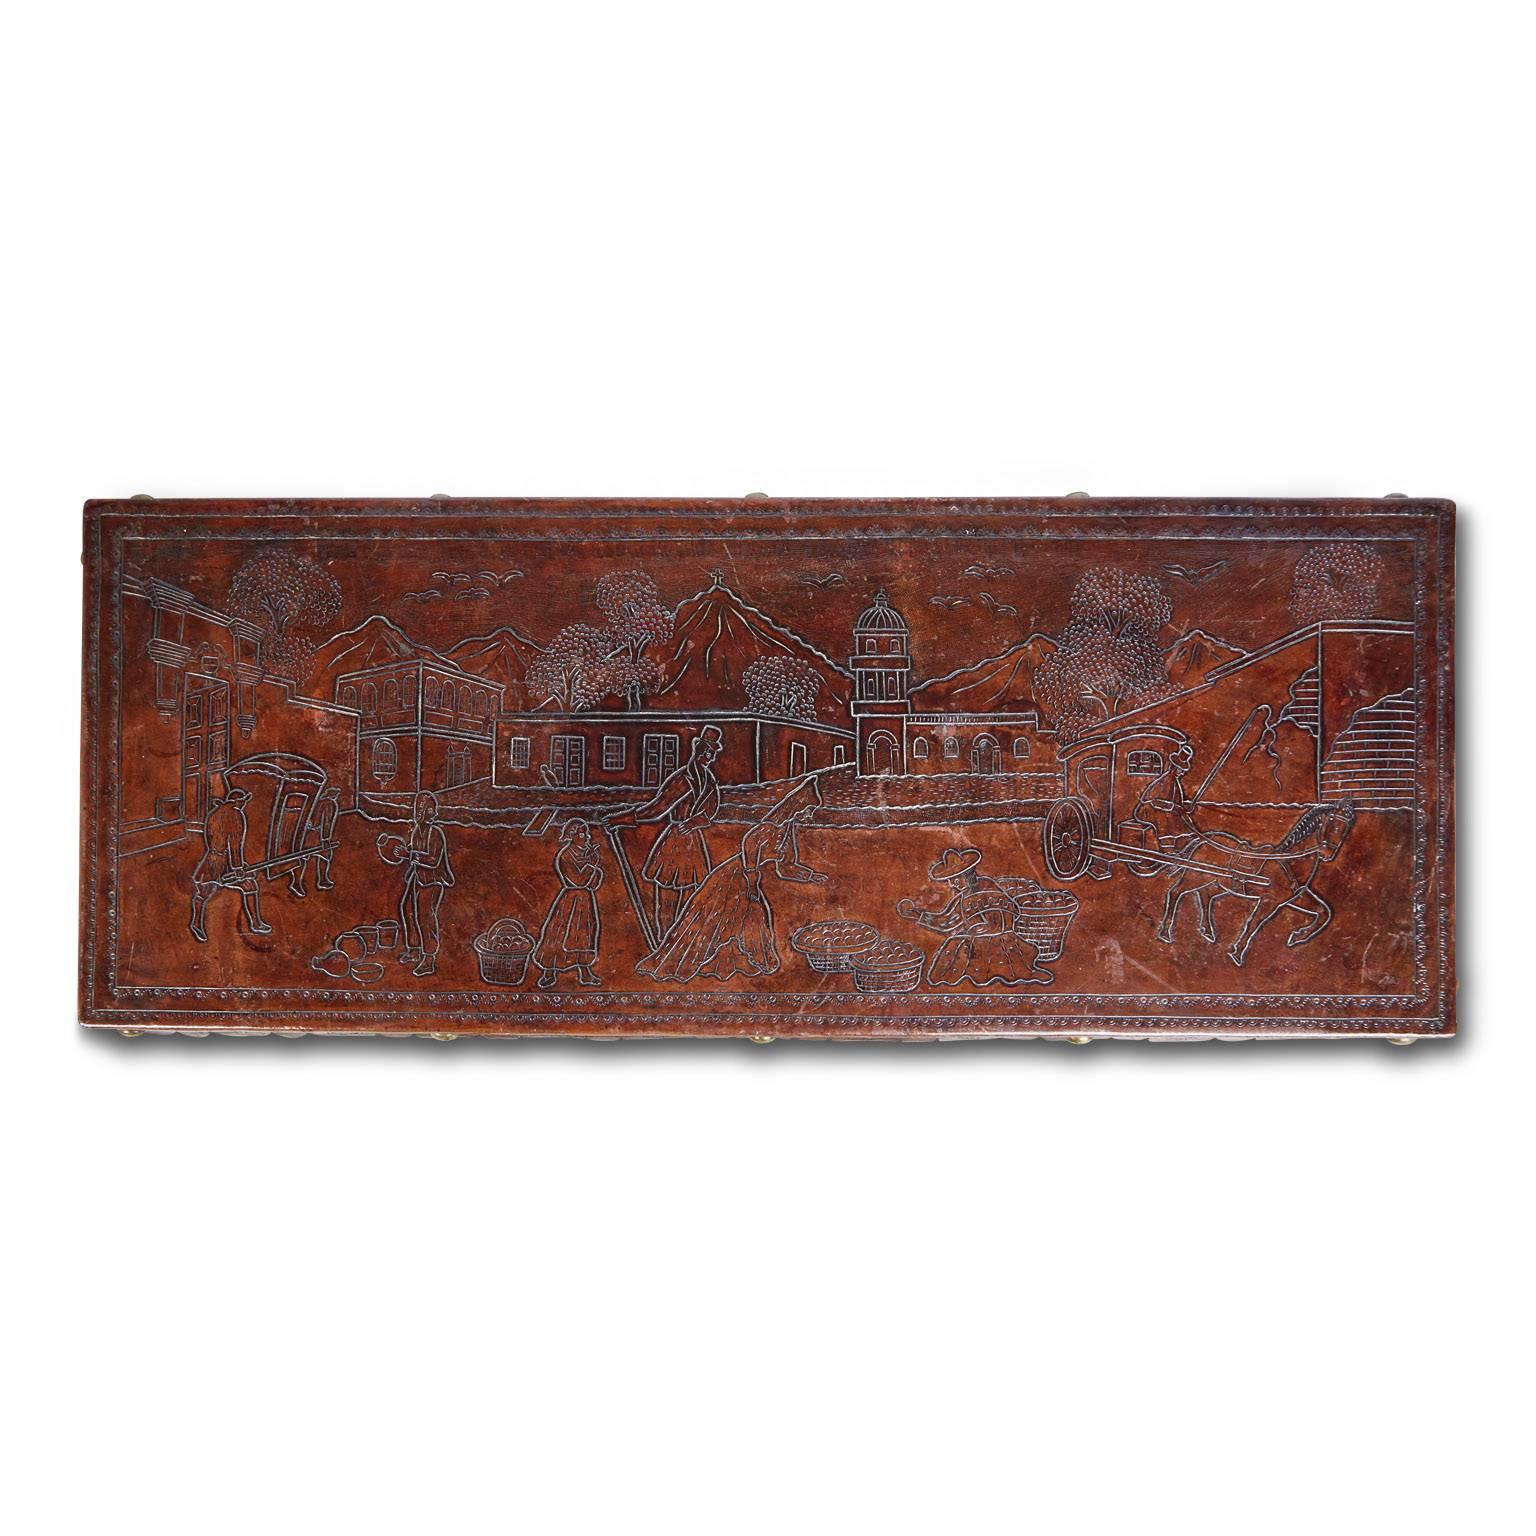 Spanish Colonial Spanish Baroque Tooled Leather Bench or Coffee Table, Colonial Missionary Scene